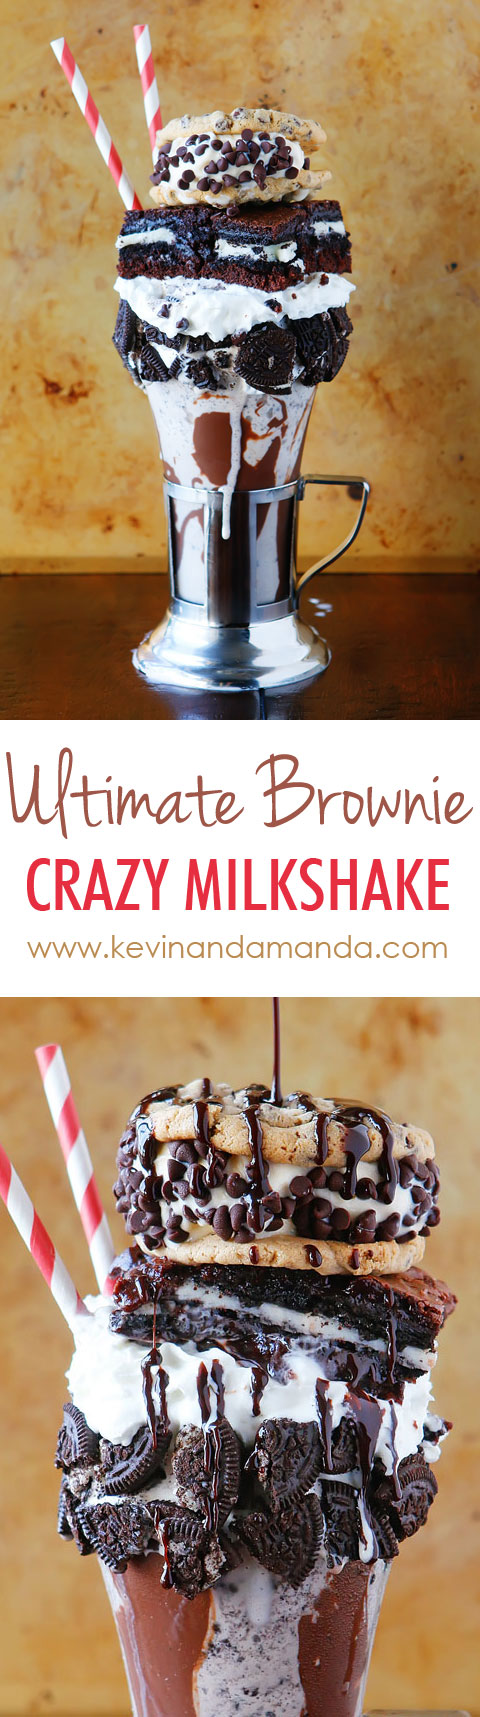 Crazy milkshakes are all the hype in NYC, London, and Australia. Now you can skip the cross country flight AND 4-5 hour wait in line and make them right at home!! Such a fun idea for a party. MUST try this!!